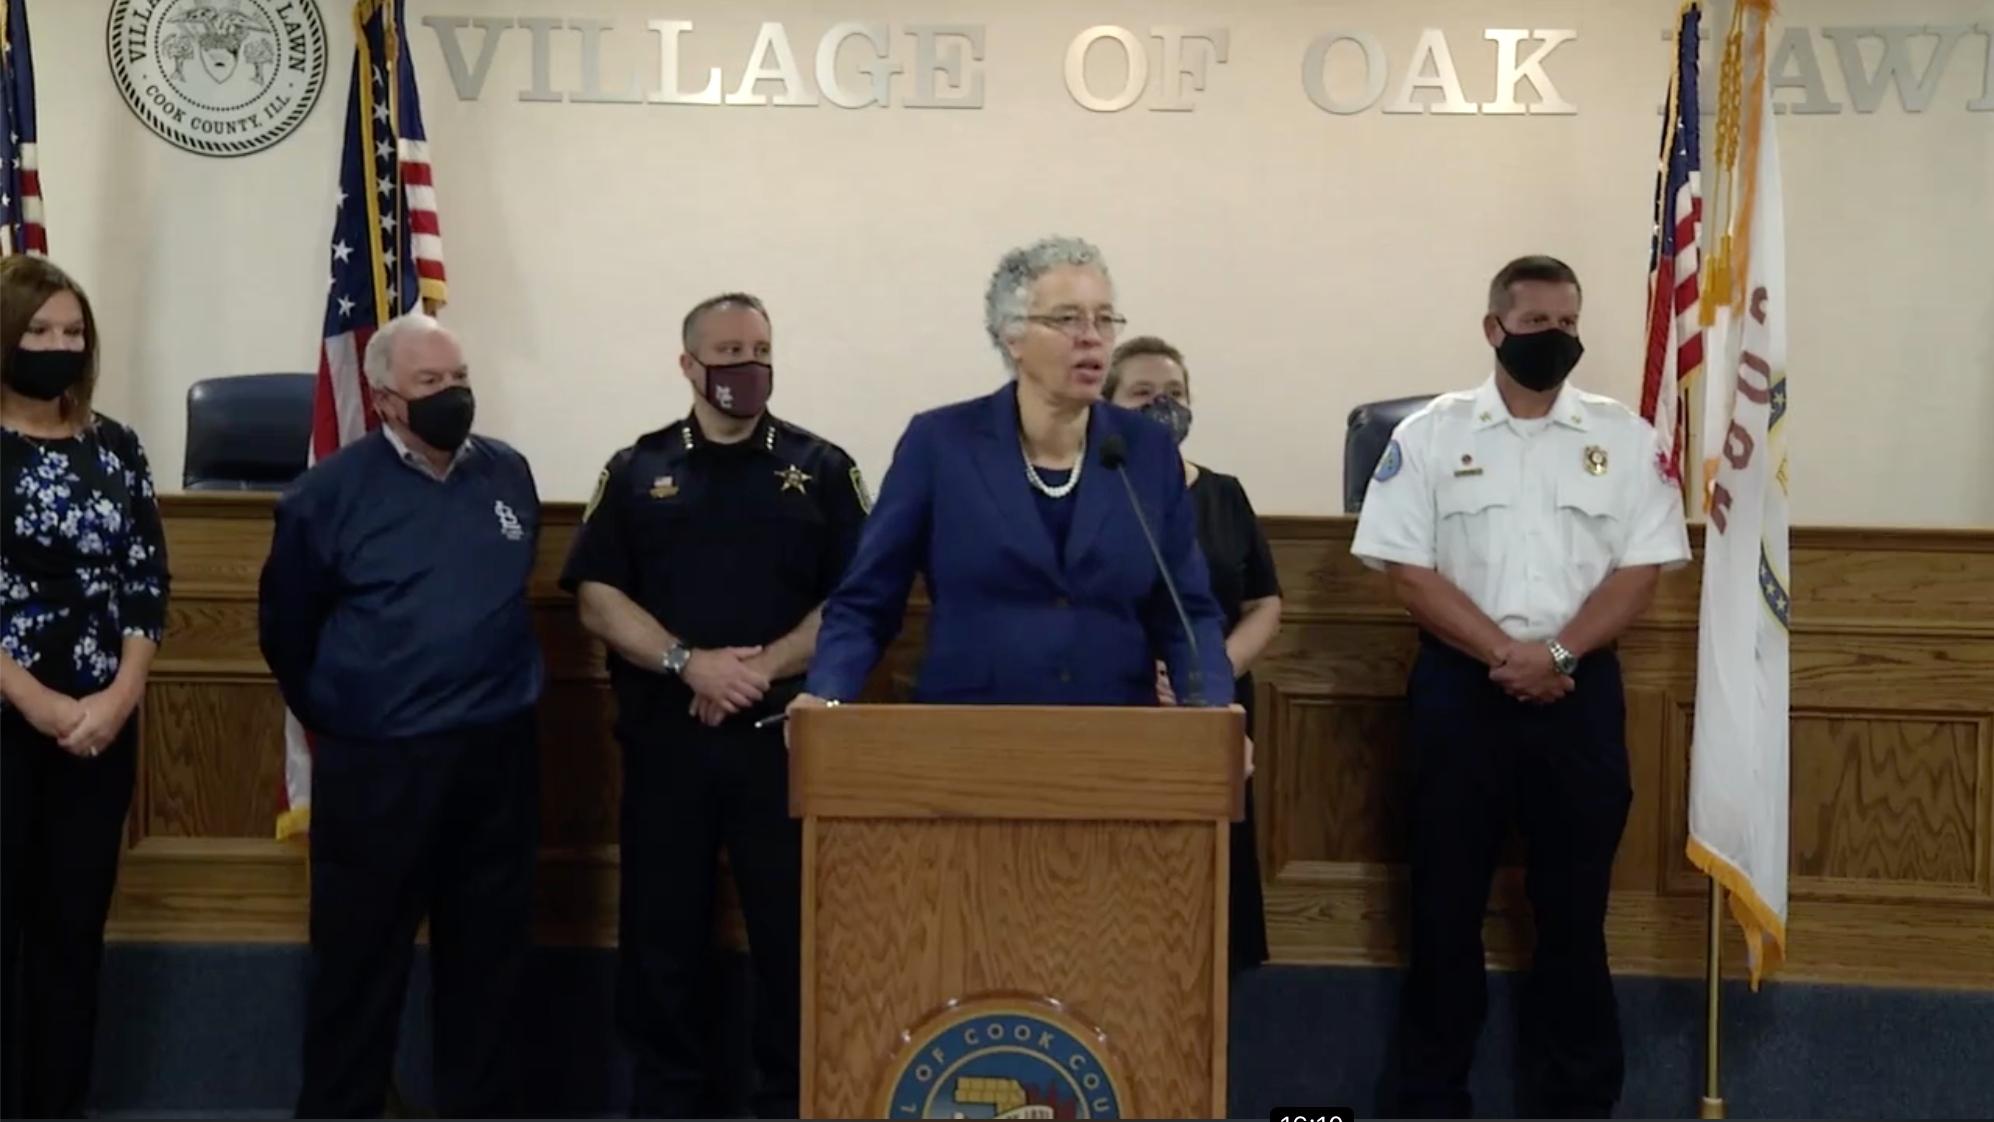 Cook County Board President Toni Preckwinkle talks Tuesday, Sept. 8, 2020 at a press conference in Oak Lawn. (Toni Preckwinkle / Facebook)